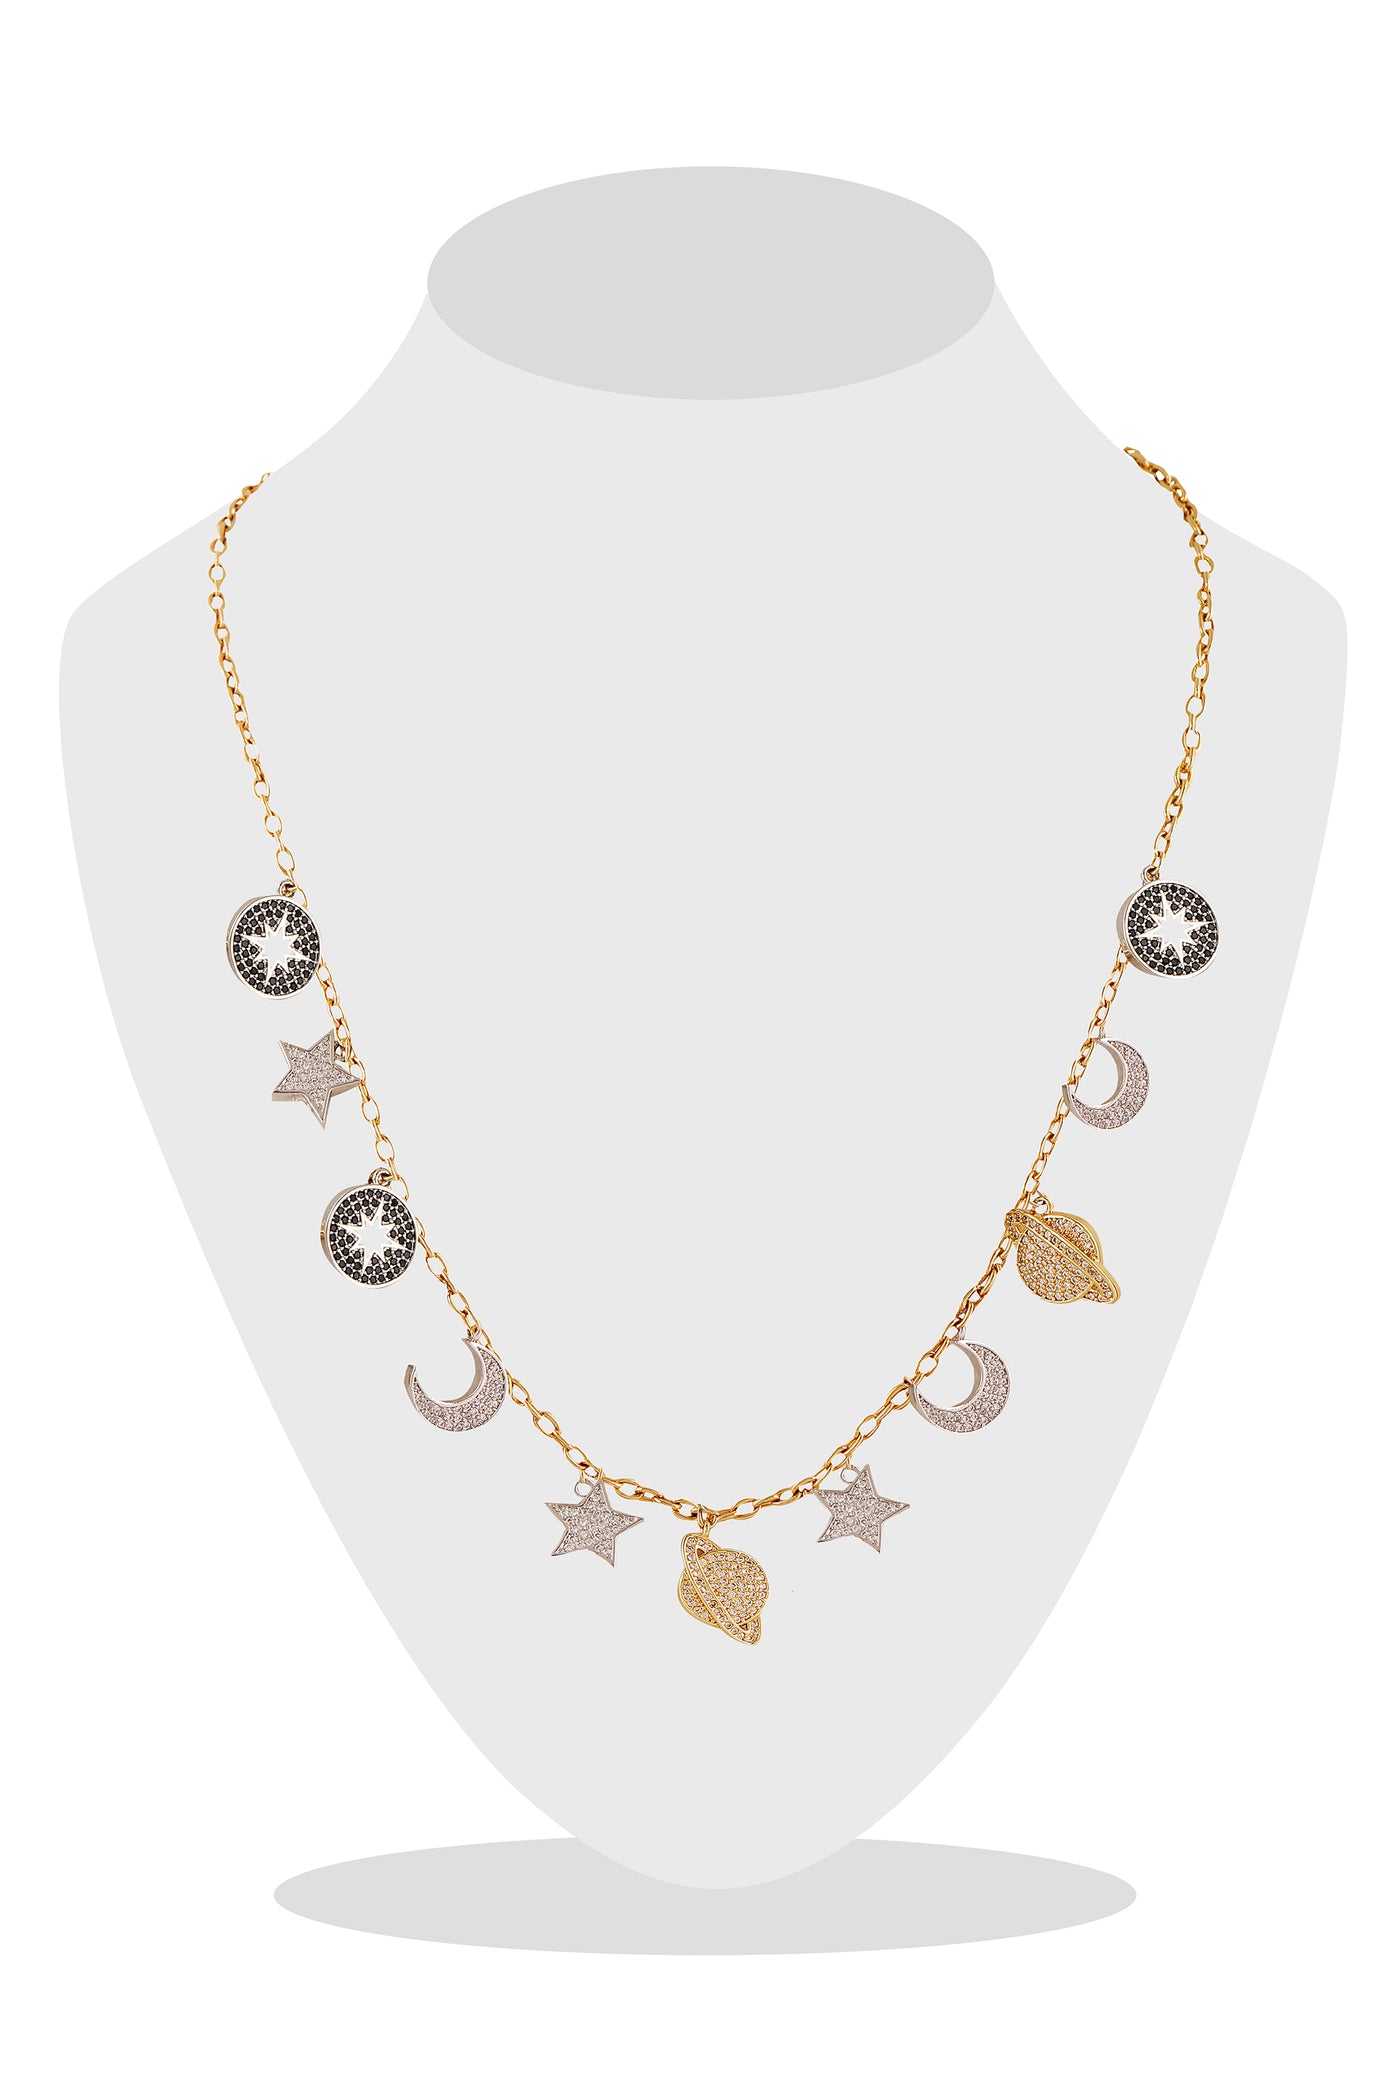 raya jewels 'Go To Space' Charms Necklace fashion jewellery online shopping melange singapore indian designer wear